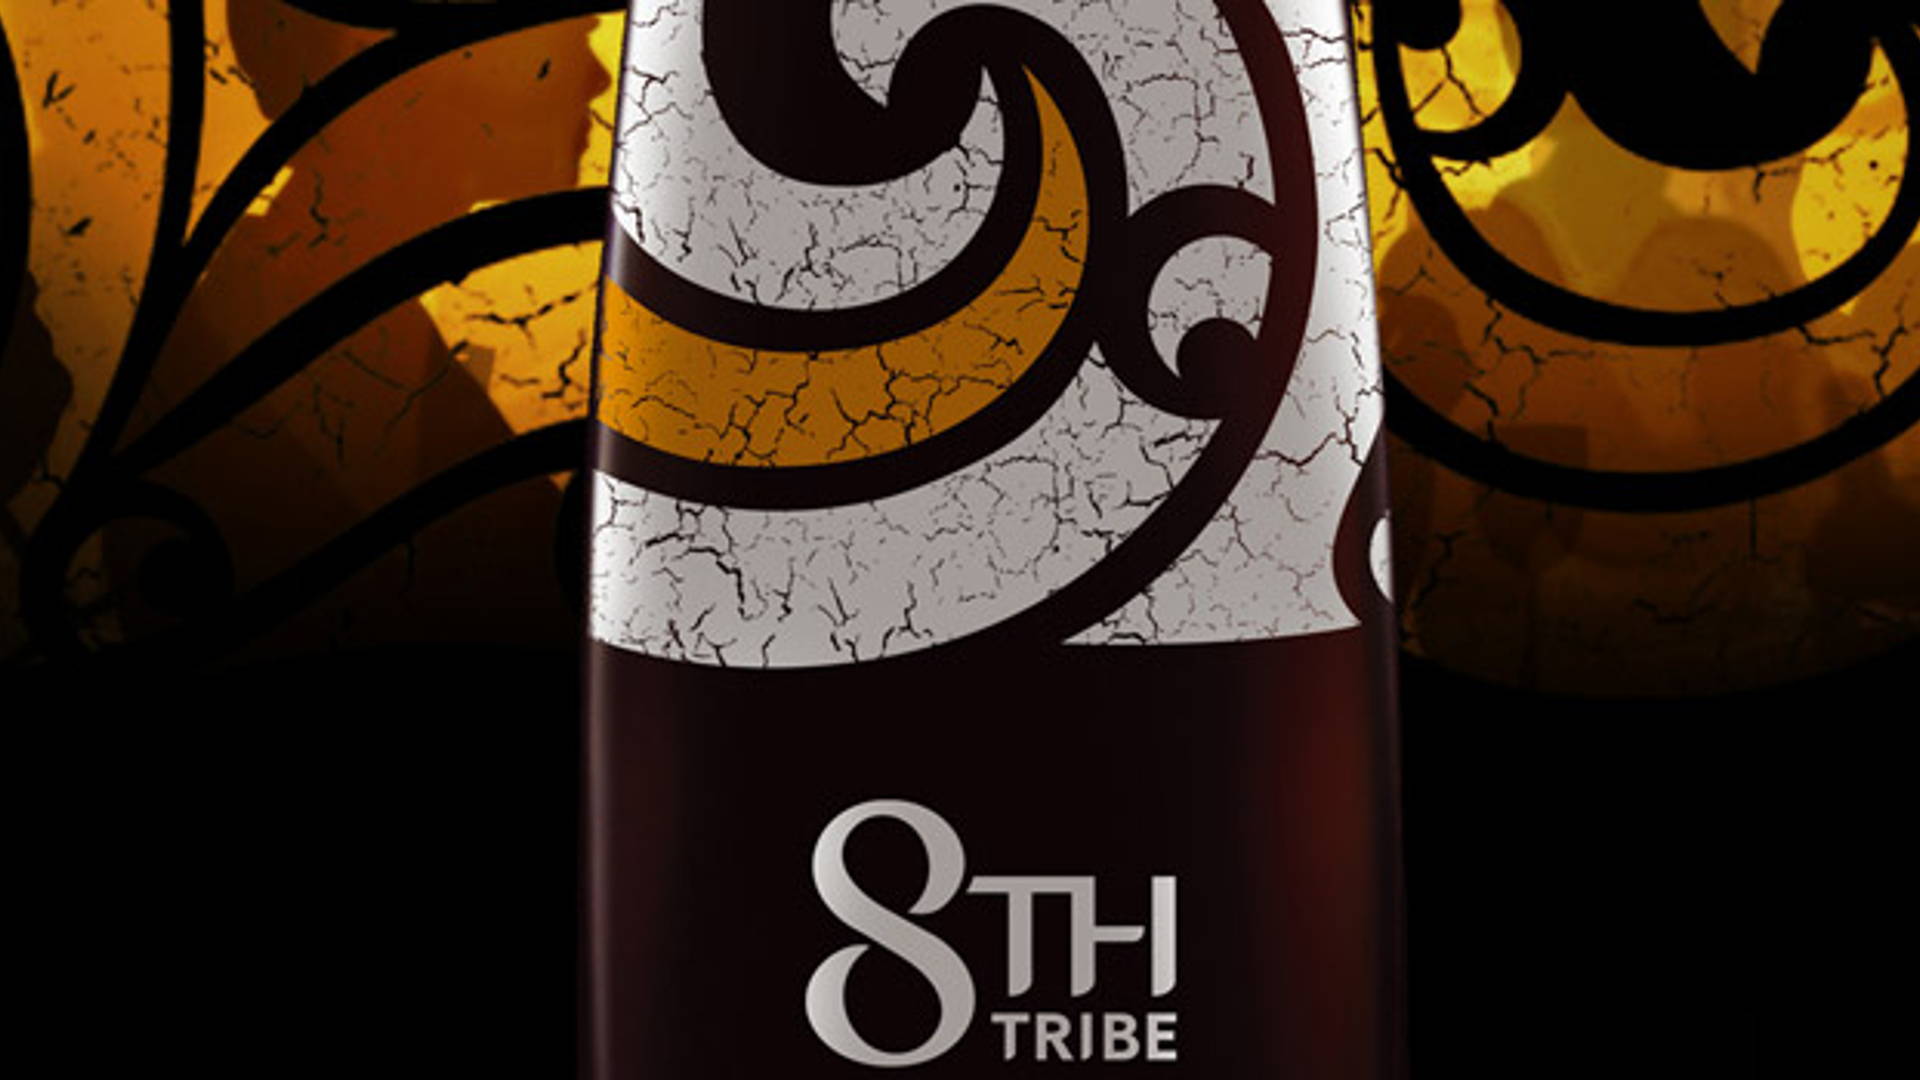 Featured image for 8th Tribe